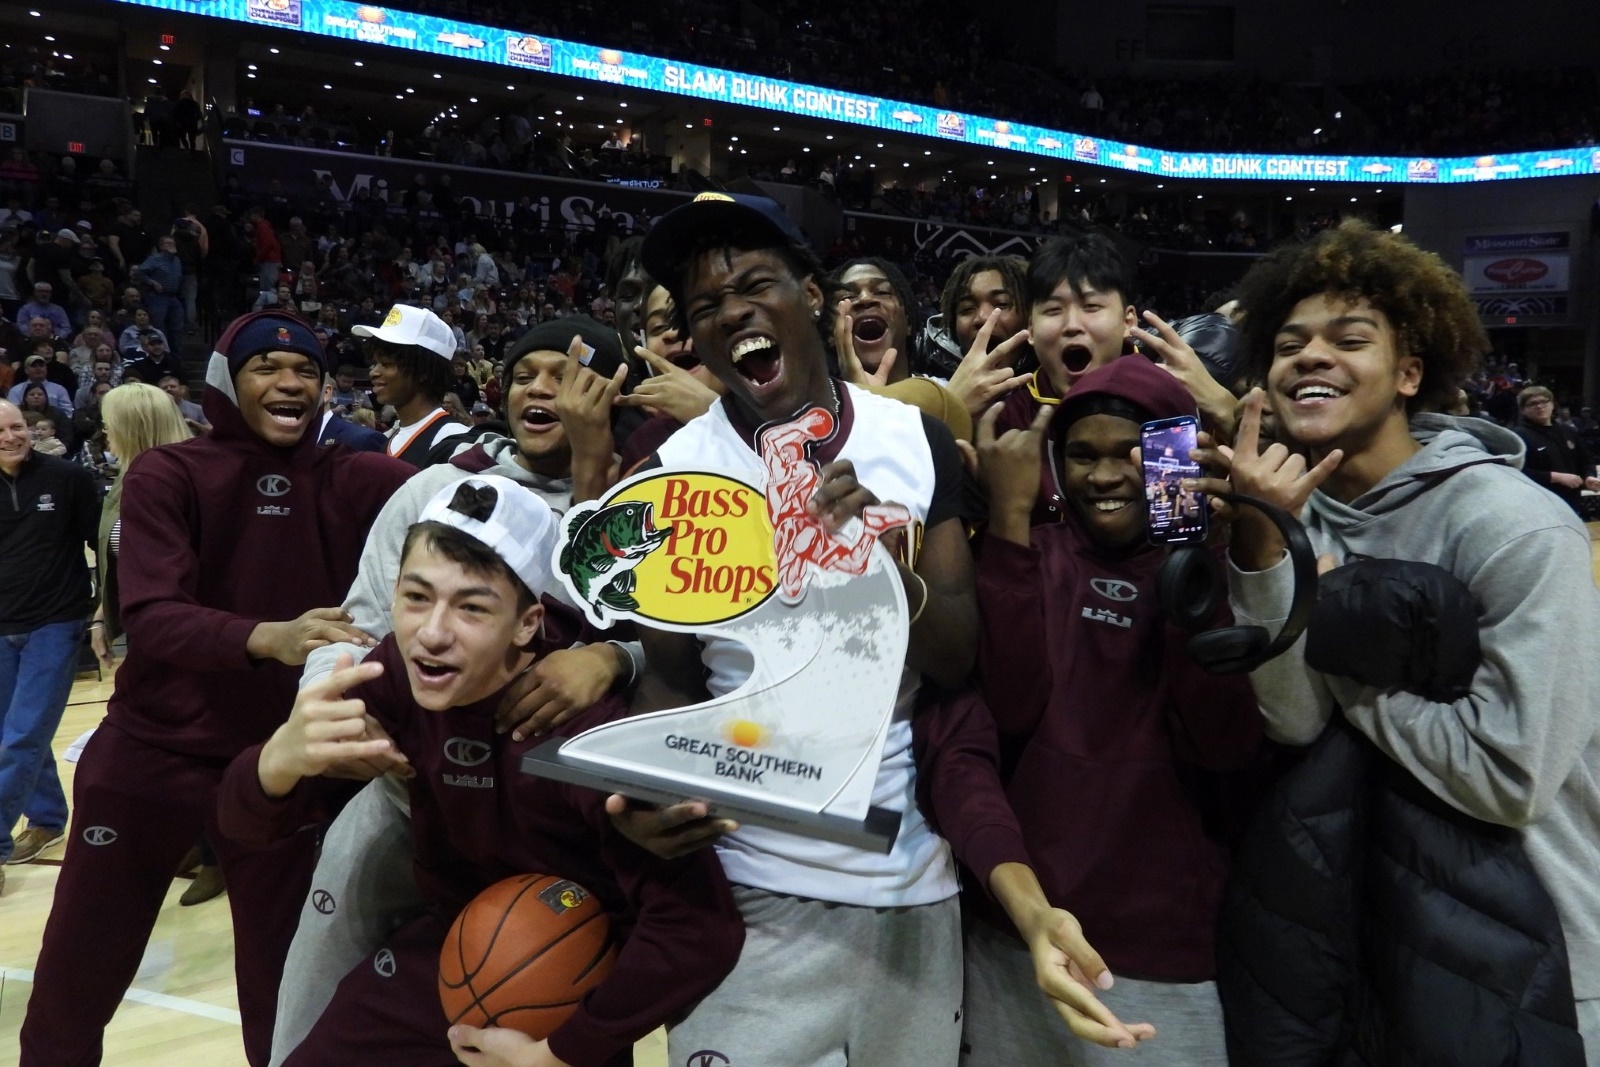 A high school basketball team celebrates after one of their teammates won a slam dunk competition